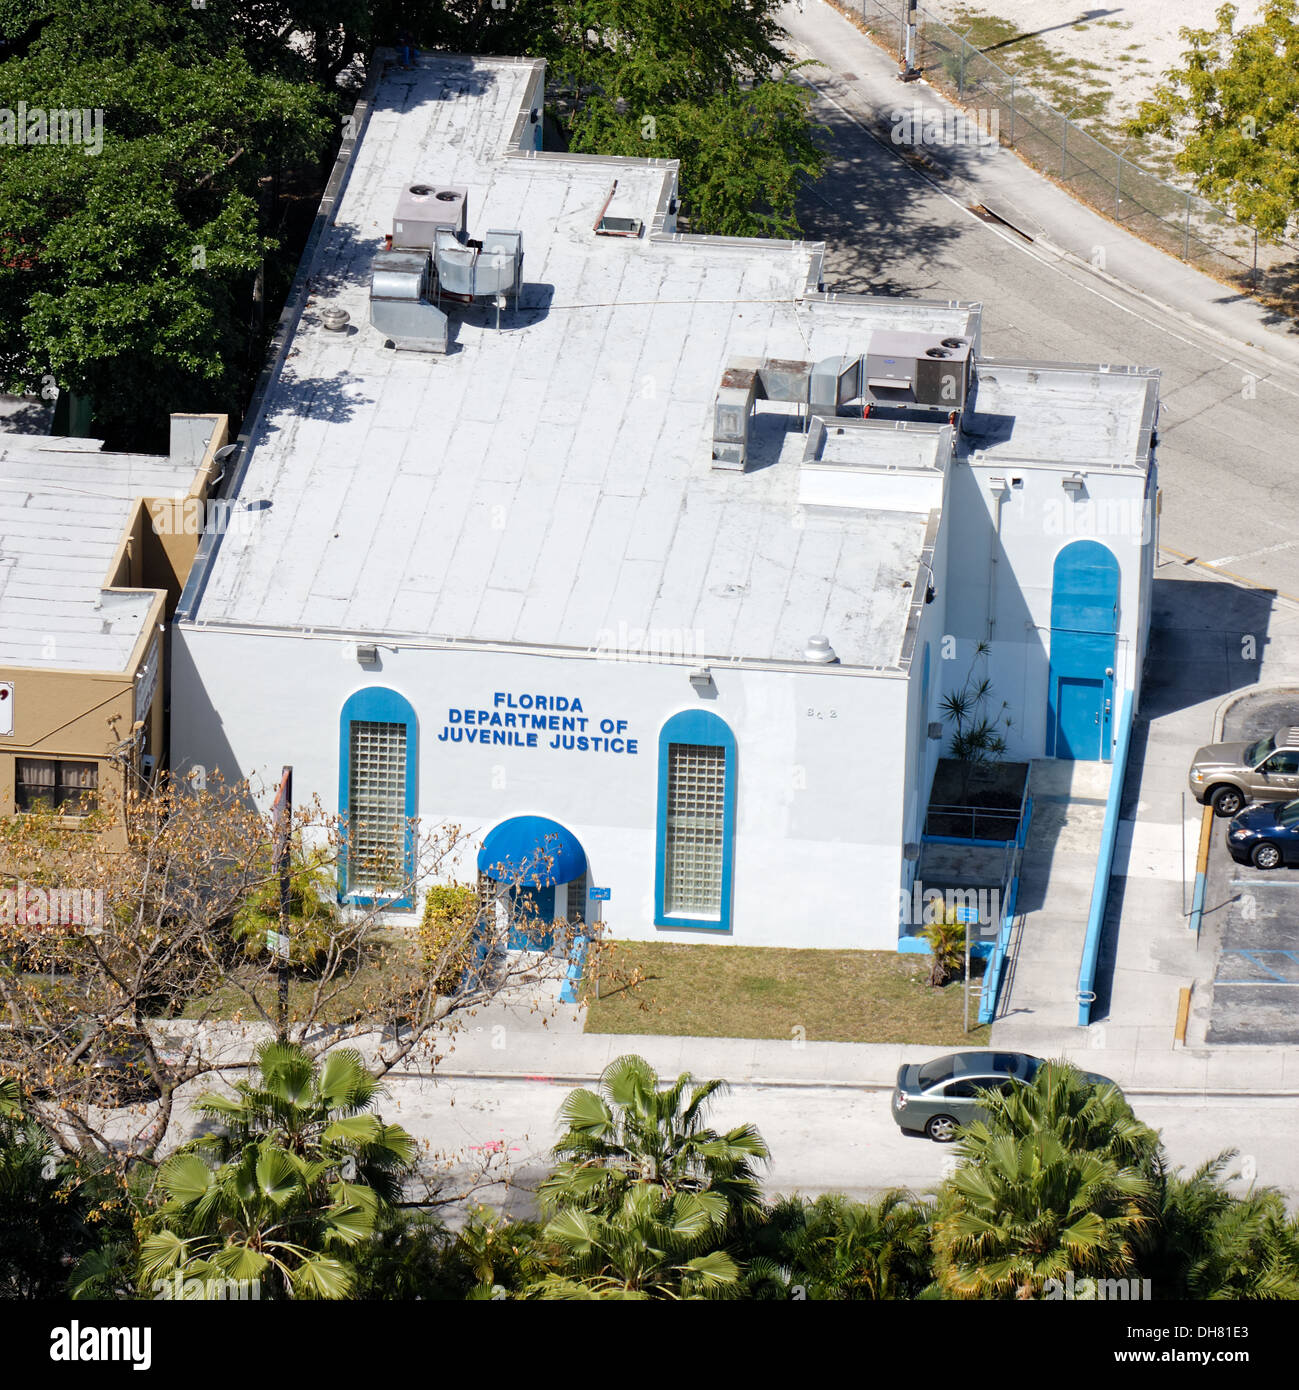 Bird's-eye view of a small building of the Florida Department of Juvenile Justice in Brickell, Miami, FL, USA. Stock Photo